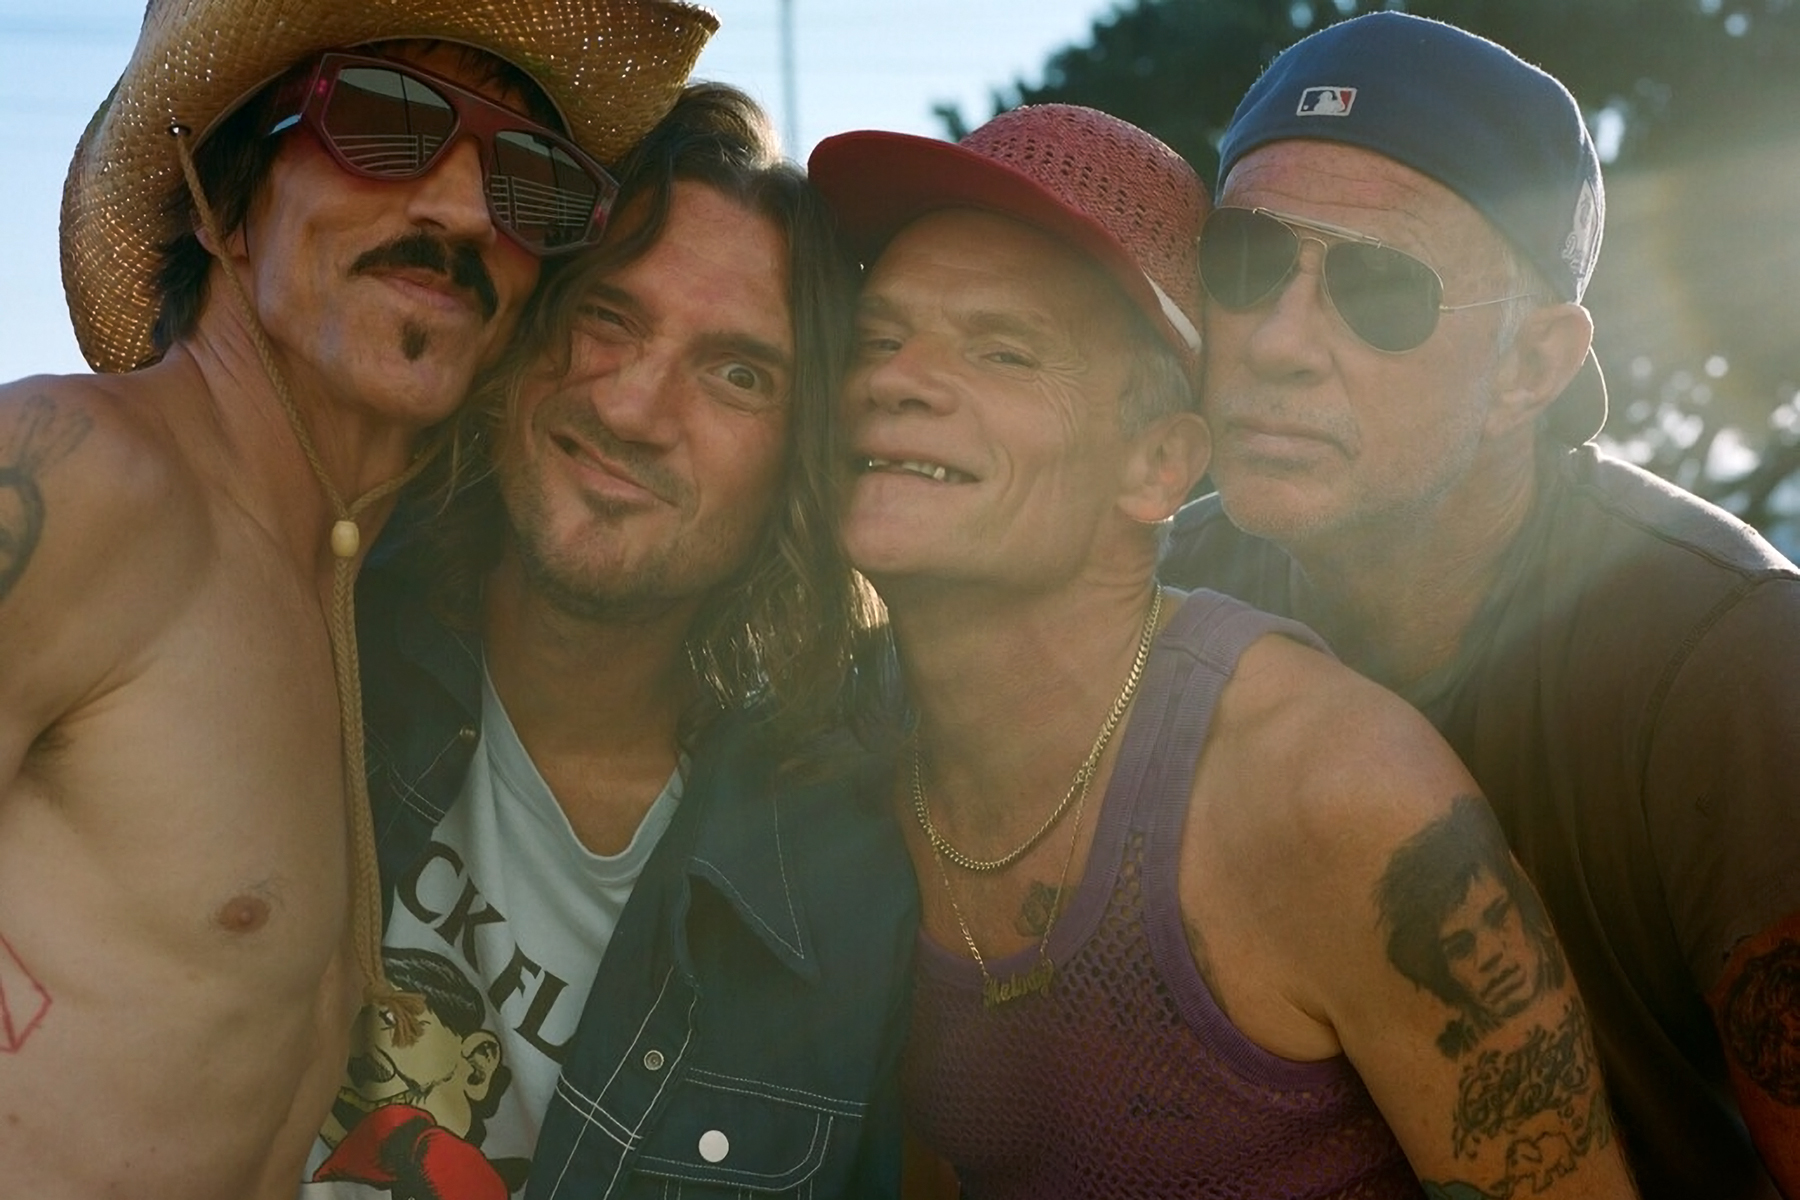 Red Hot Chili Peppers Release New Single “Black Summer”